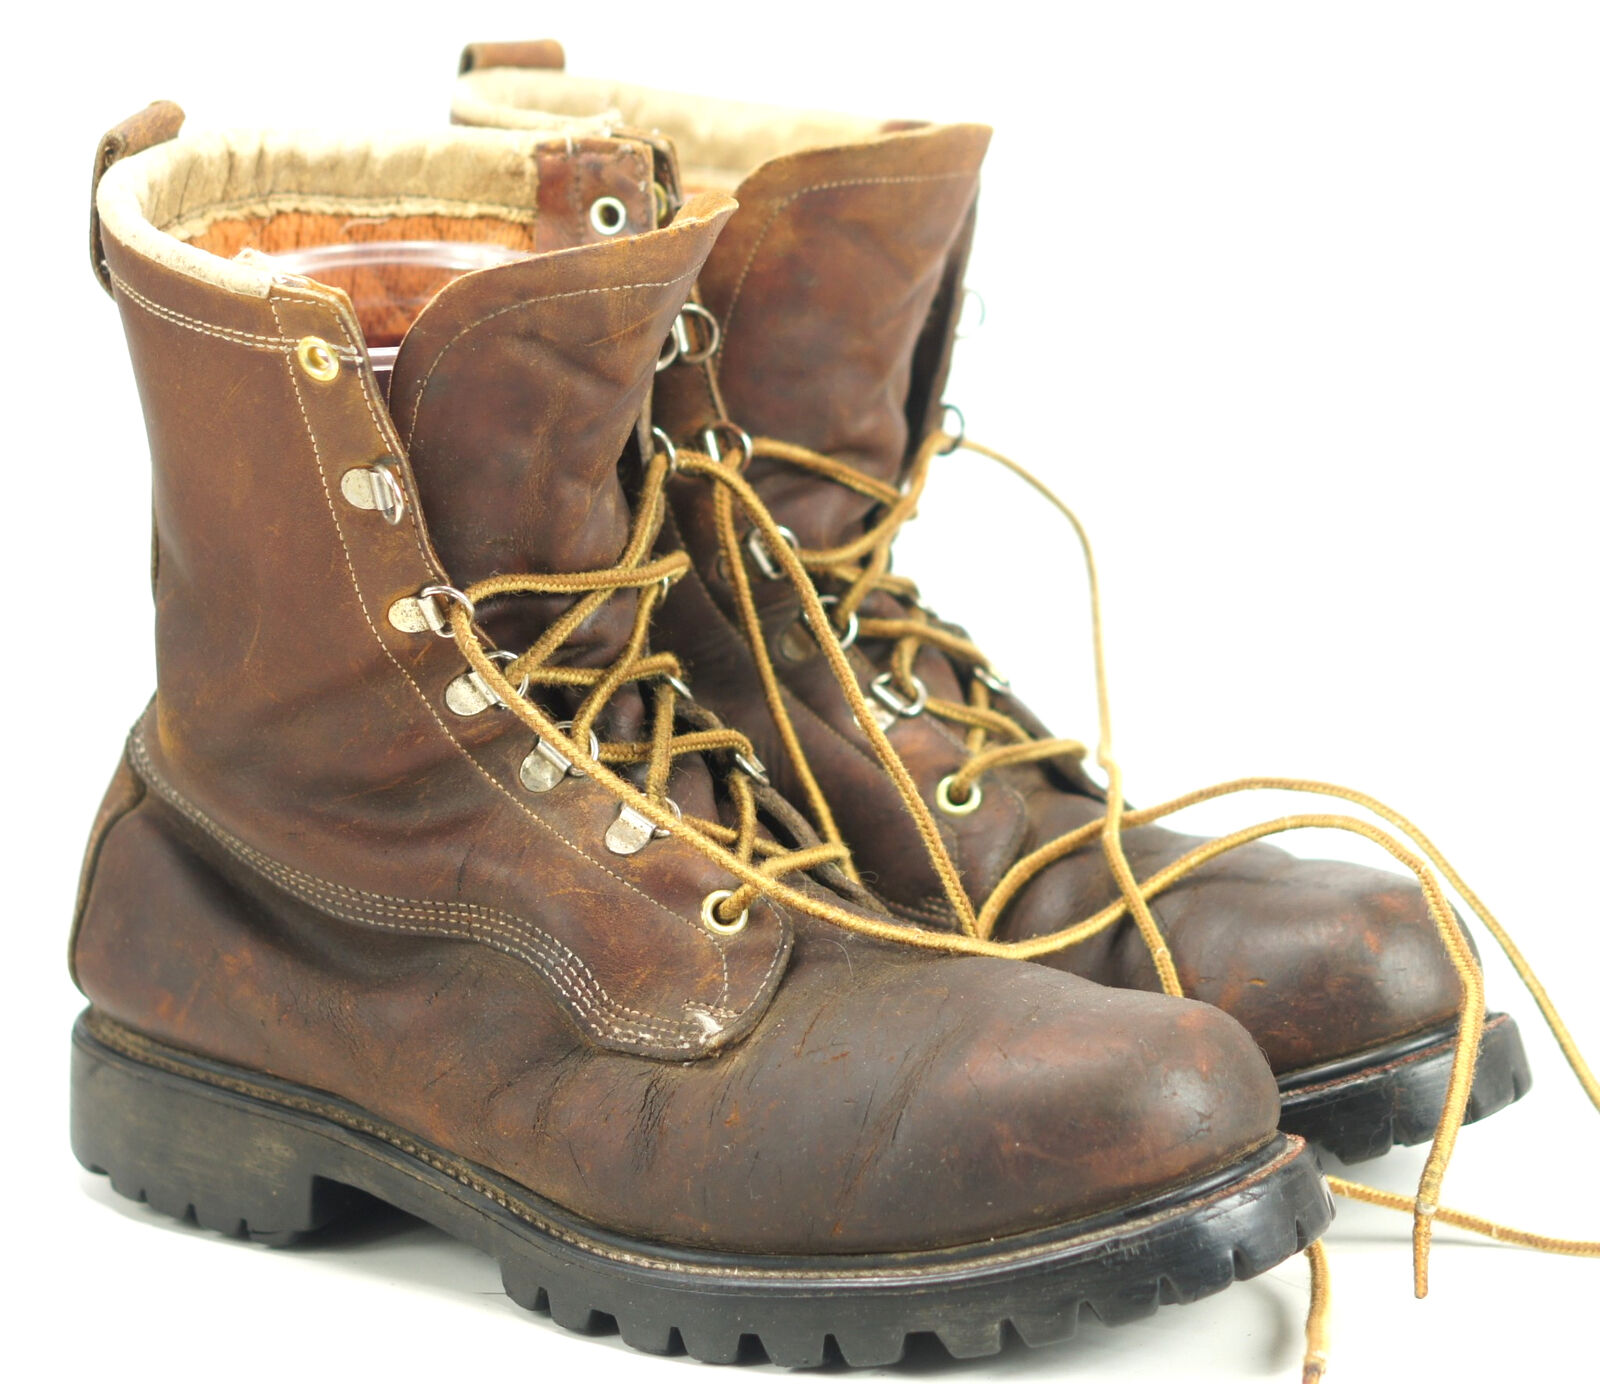 Vintage Hytest Insulated Lace Up Brown Leather Work Biker Boots Vibram ...